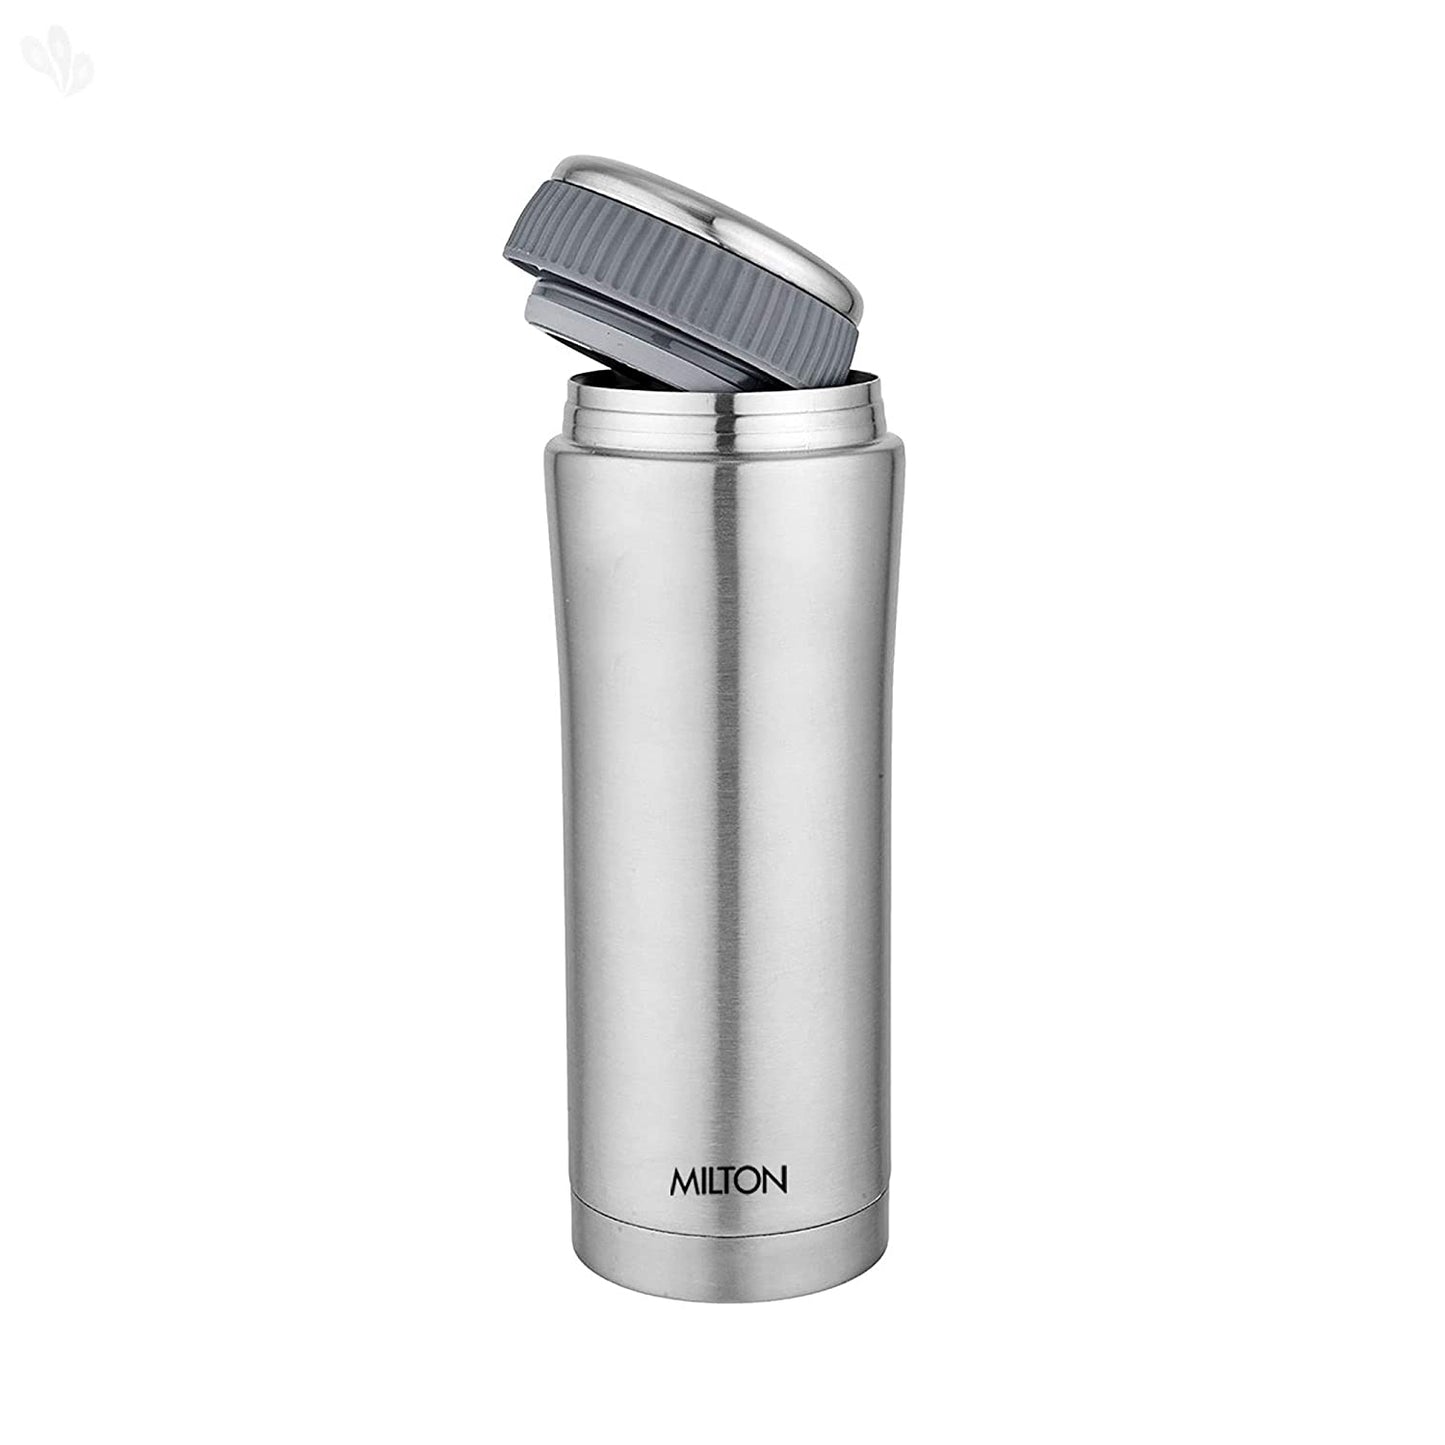 Milton Optima Mug Thermosteel Vacuum Insulated Stainless Steel Double Wall Hot and Cold Flask